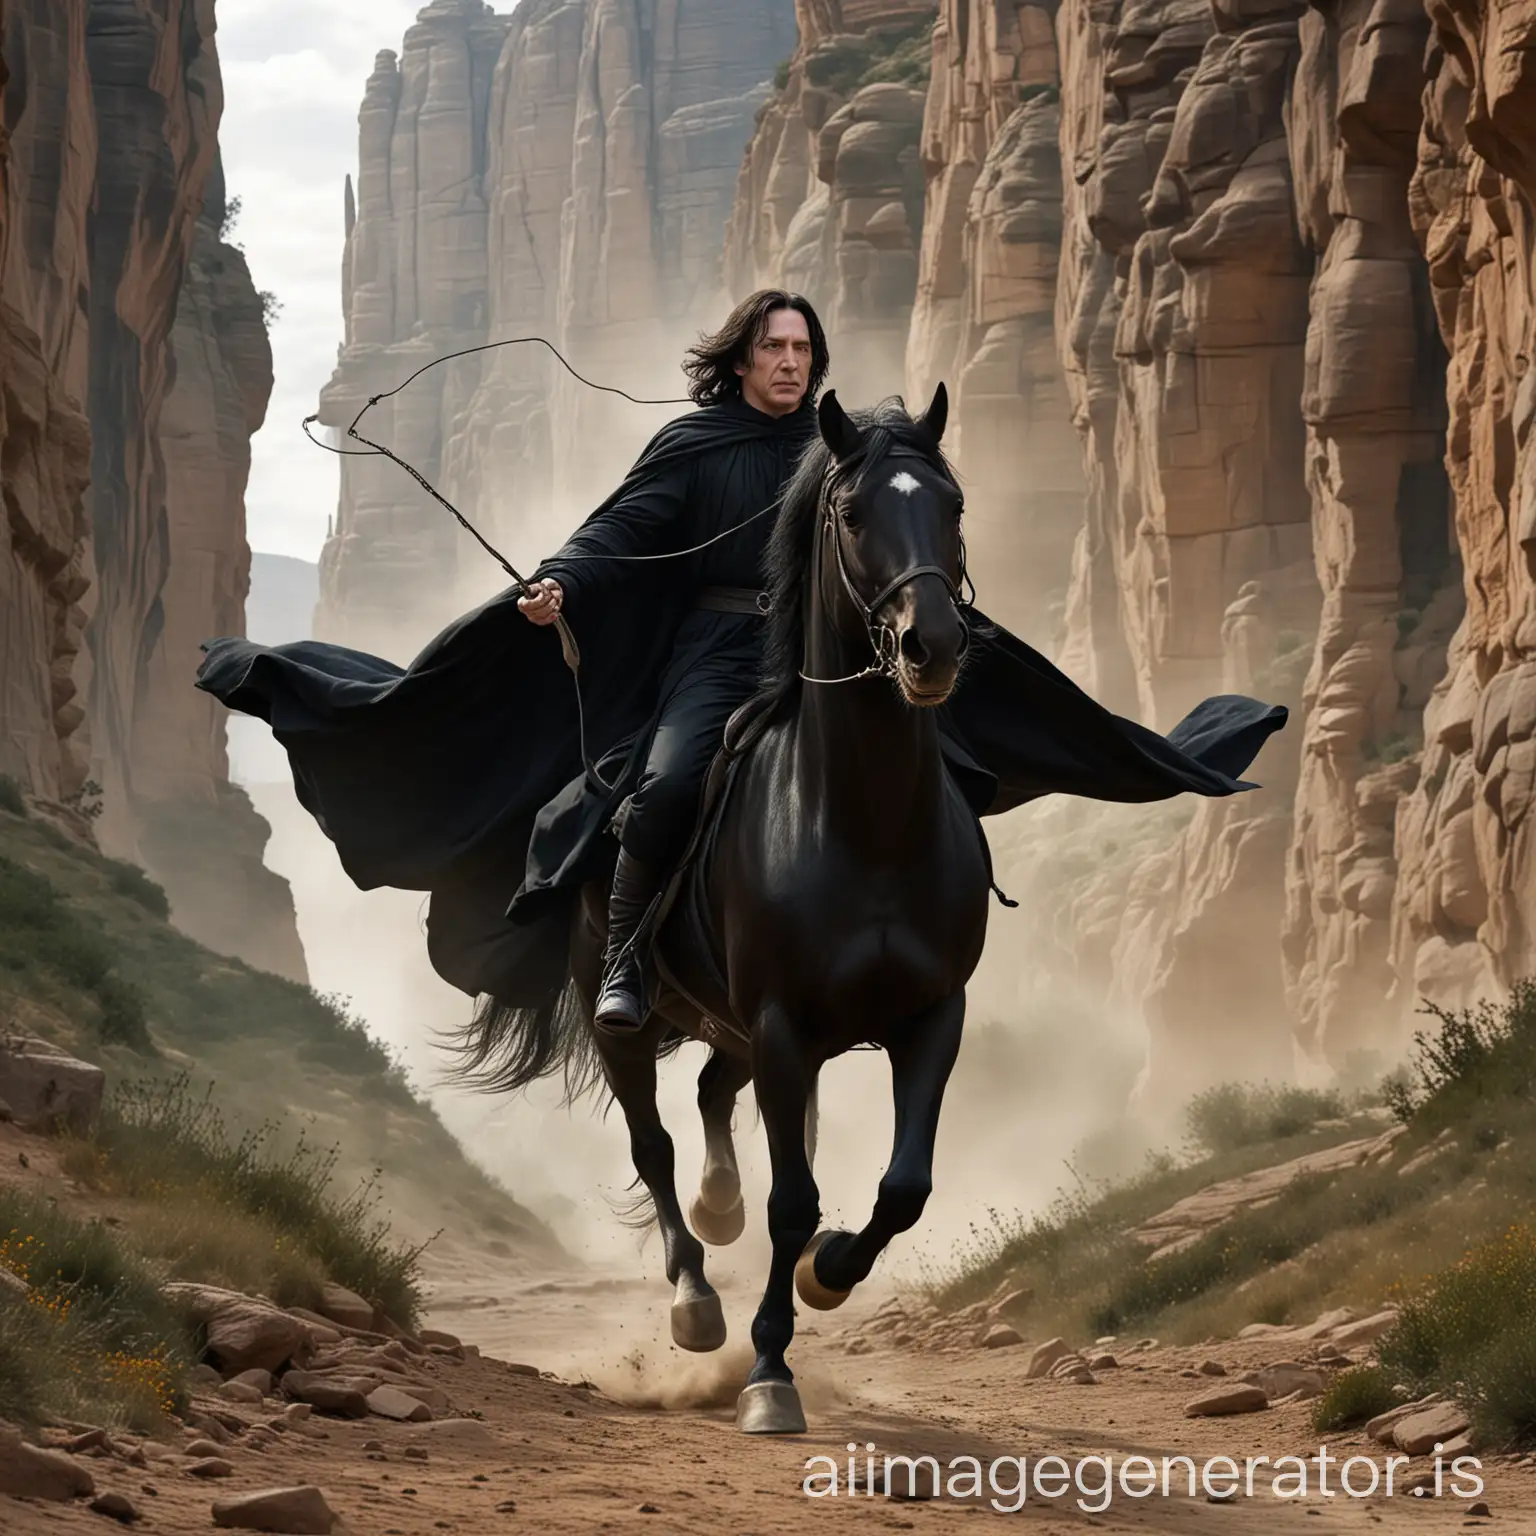 Severus Snape, with features exactly like those in the Harry Potter film, dressed in a black robe, sits and acts like a black horse galloping through a canyon. He holds a lasso in his hands. He gallops and chases another wild horse.